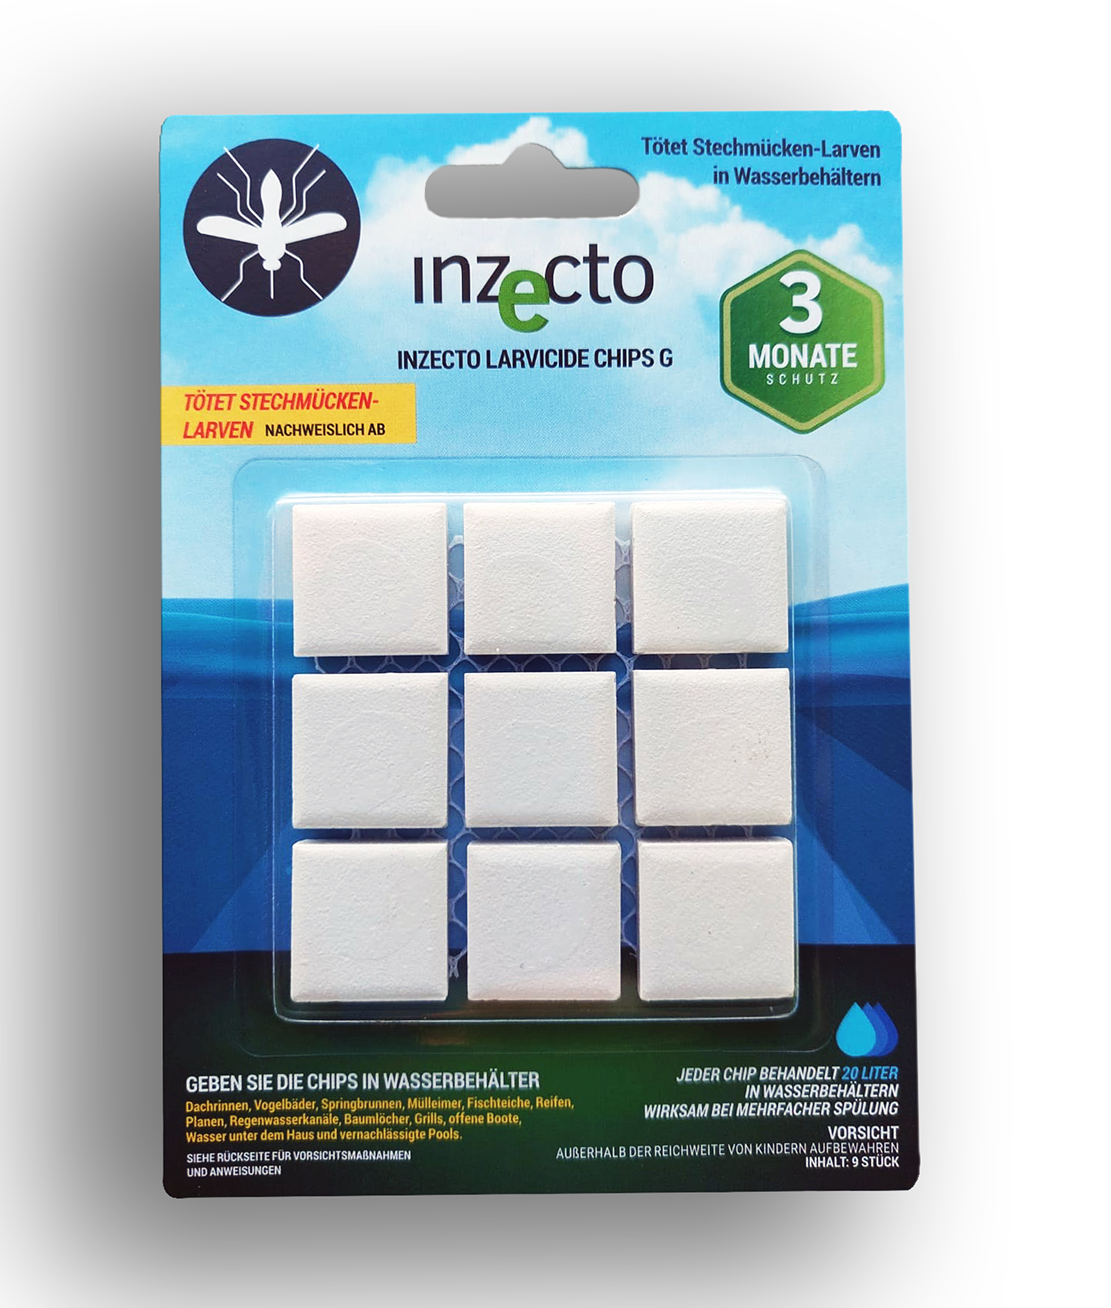 Inzecto-Mosquito-Chips-blister-pack-1-1.png